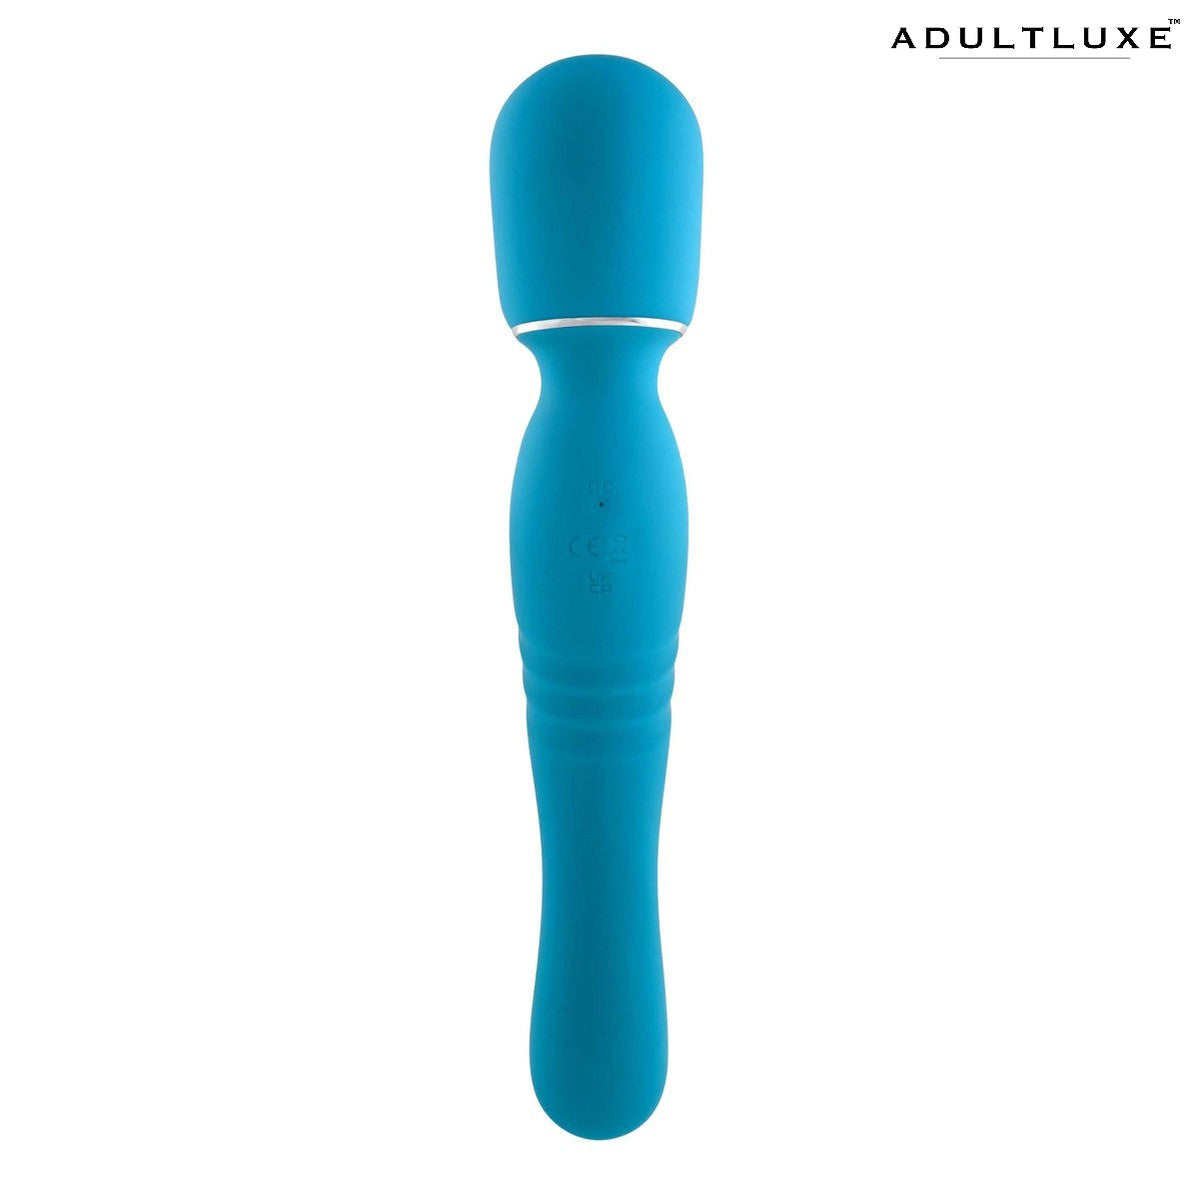 Double the Fun Wand with G-Spot Vibration